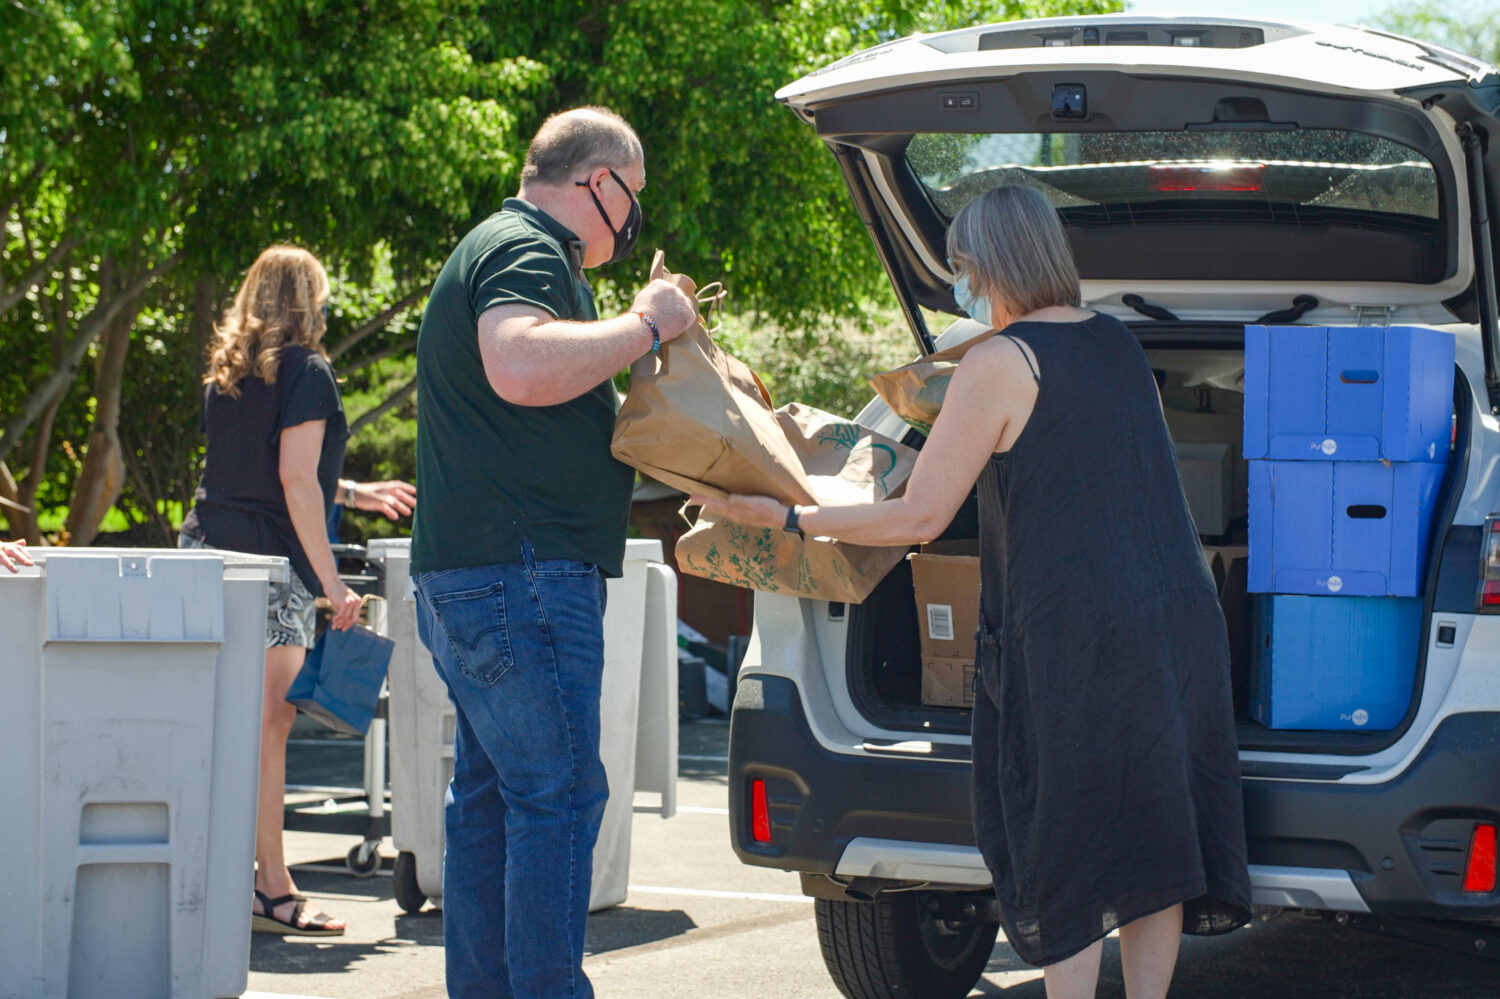 Shred Day attendees removing bags of shred material from the trunk of an SUV.